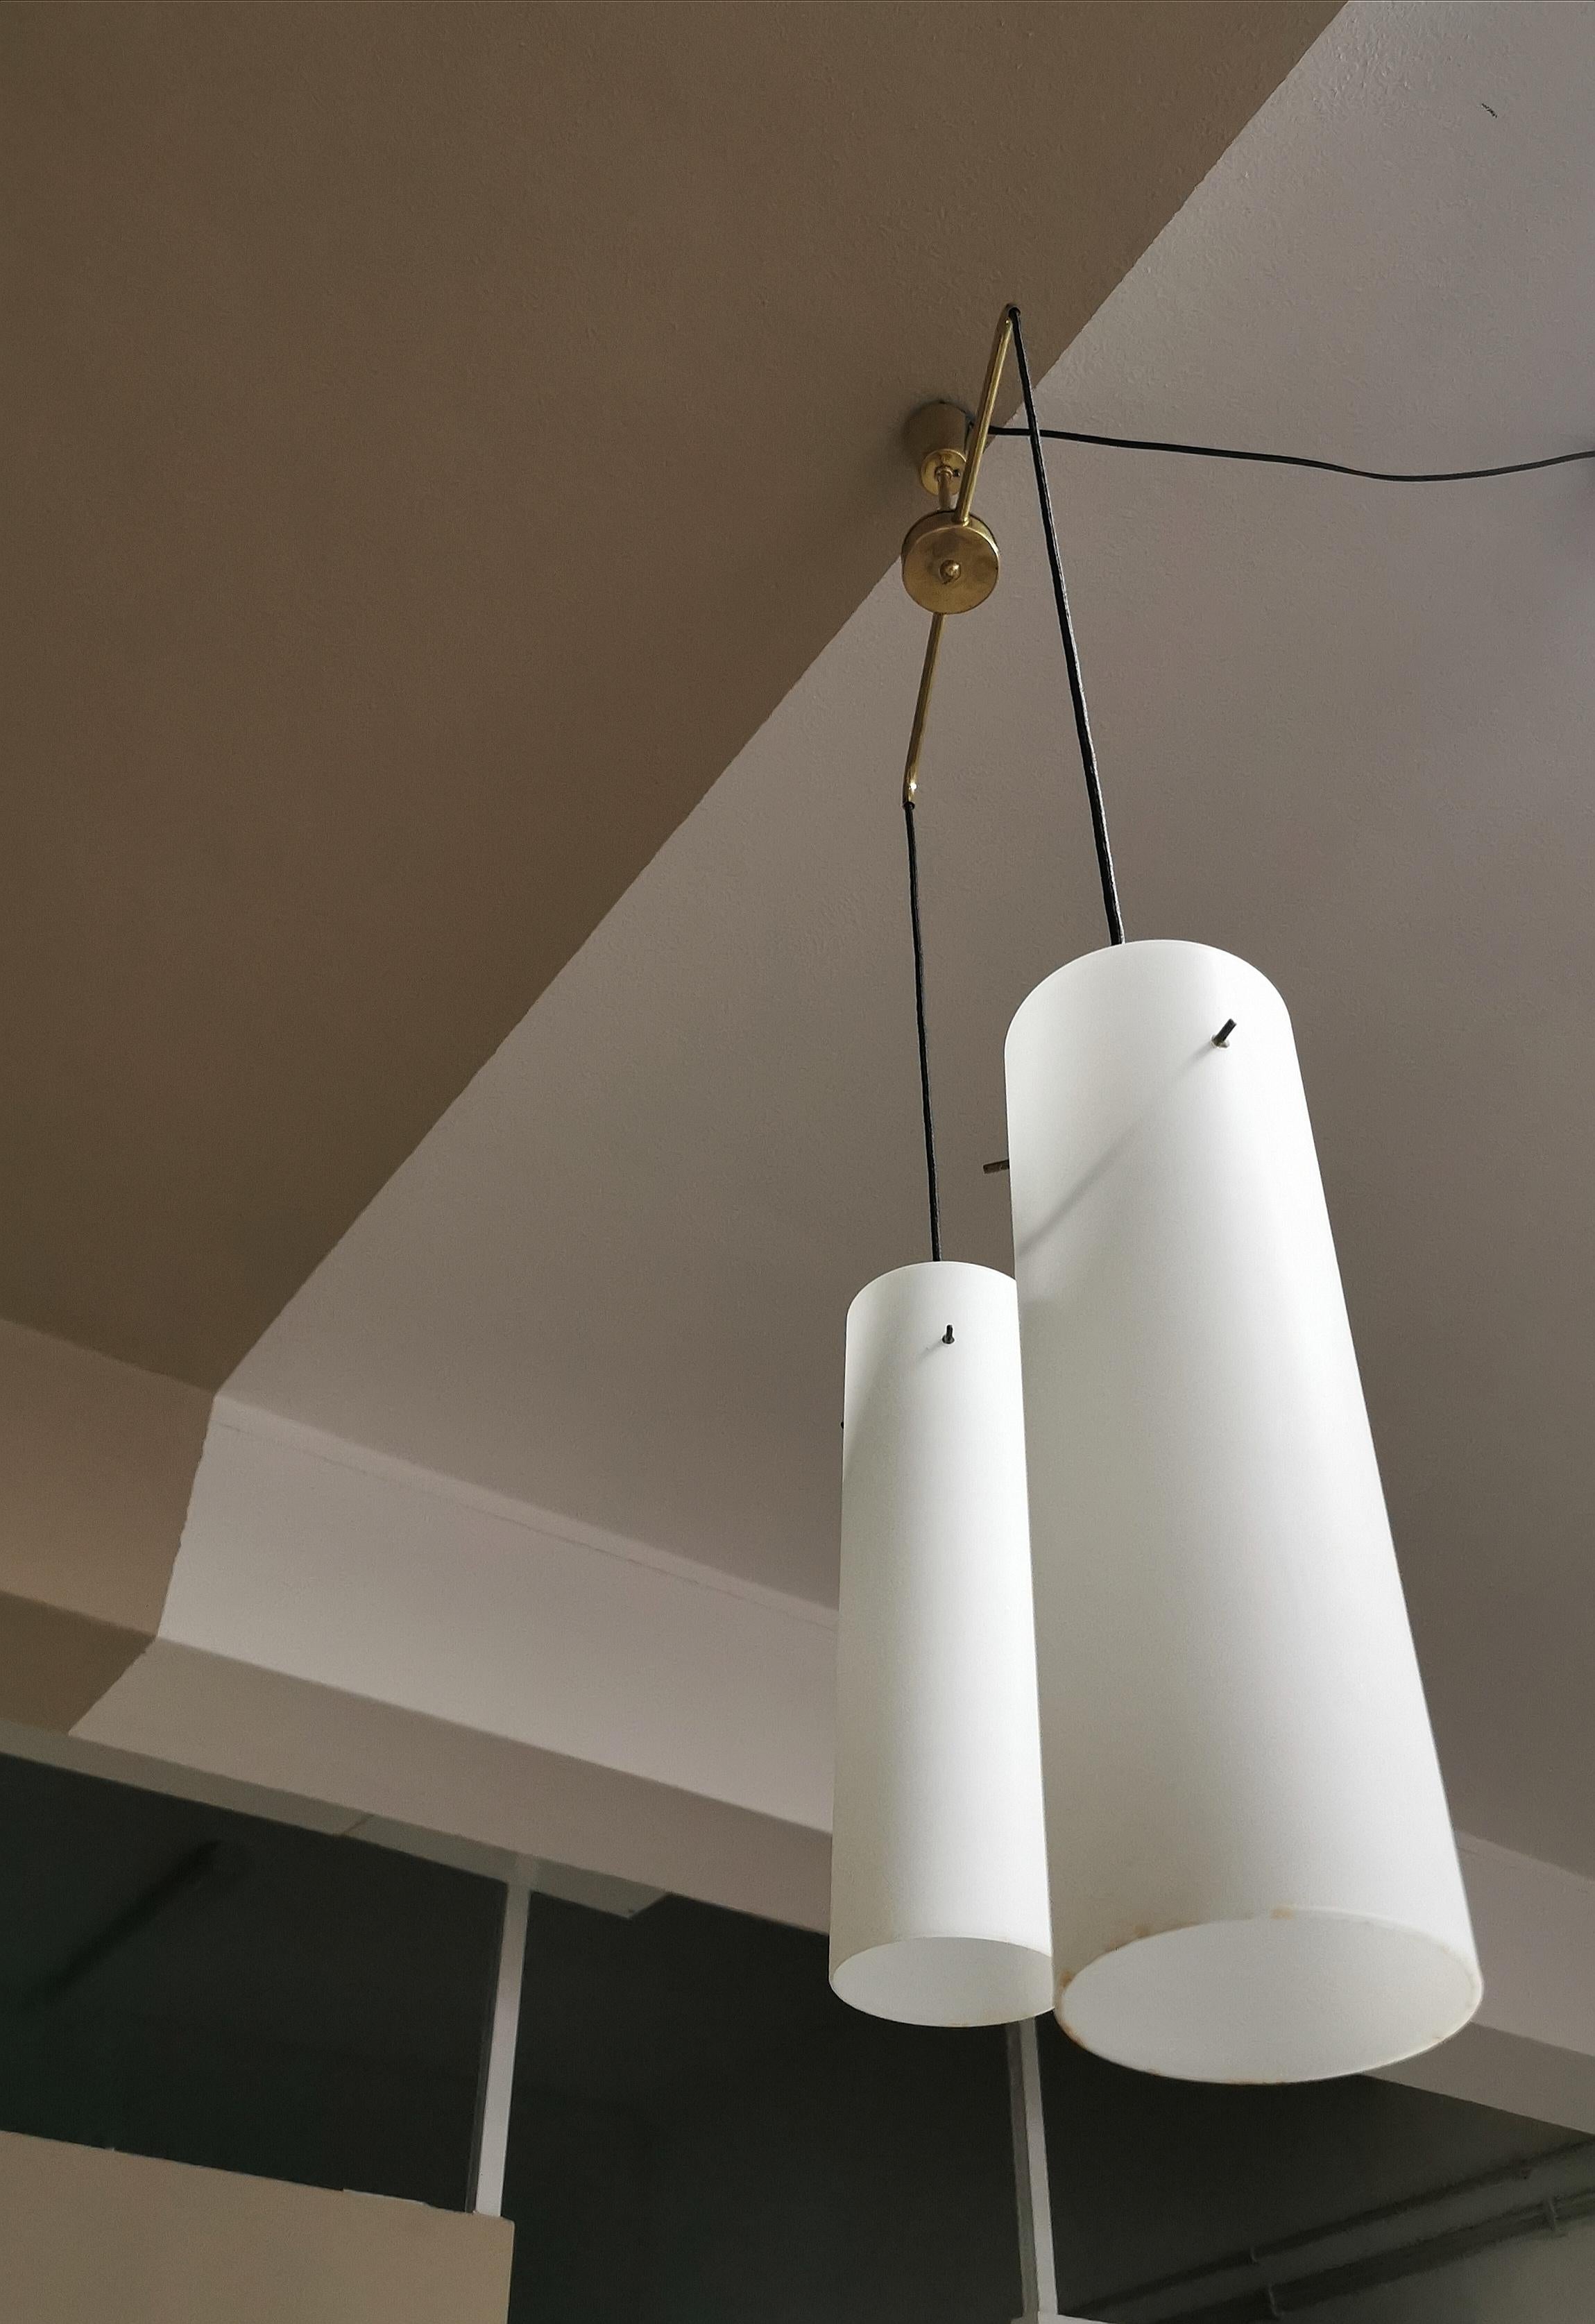 Suspension with 2 pendants with 2 lights in opal glass with brass structure and two ropes that support the two diffusers. Italian production from the 1960s.